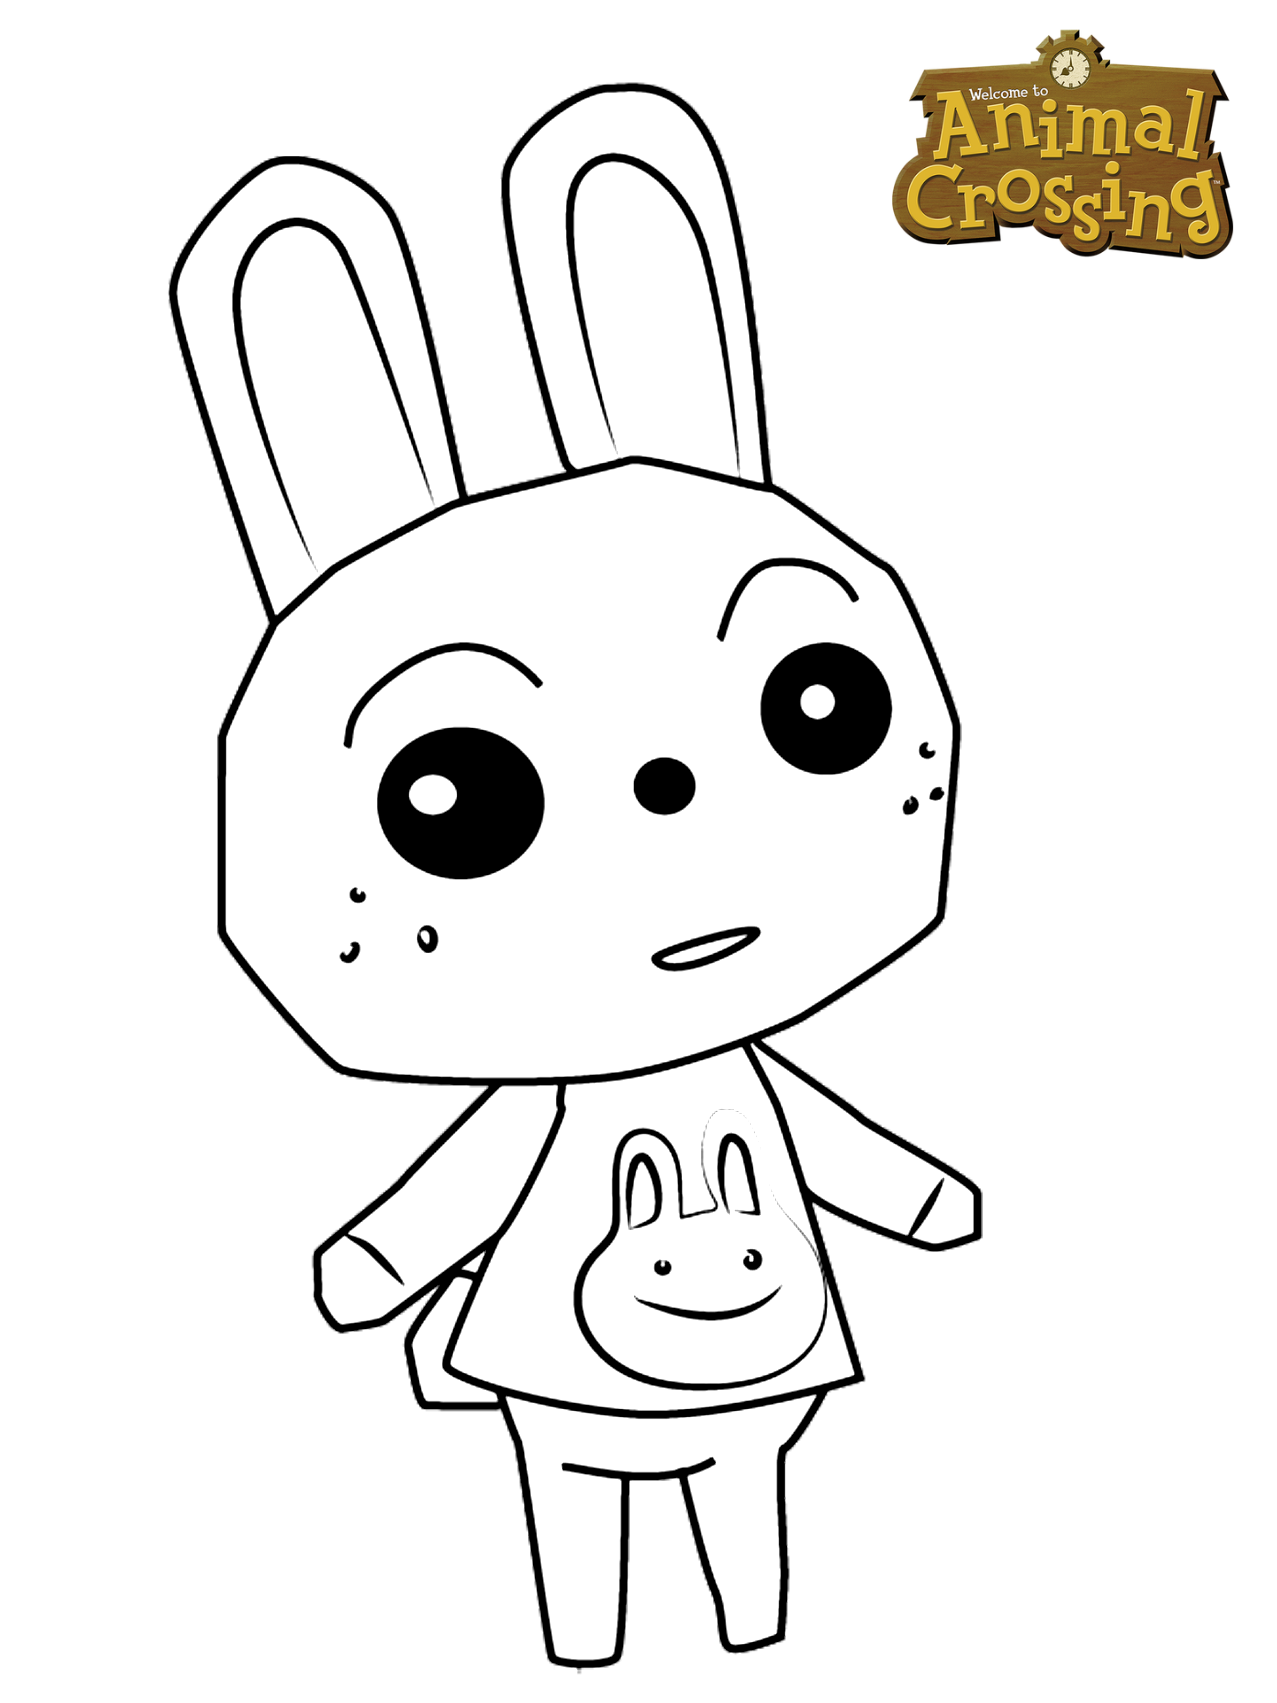 Animal Crossing Coloring Pages - Coloring Pages Animal Crossing